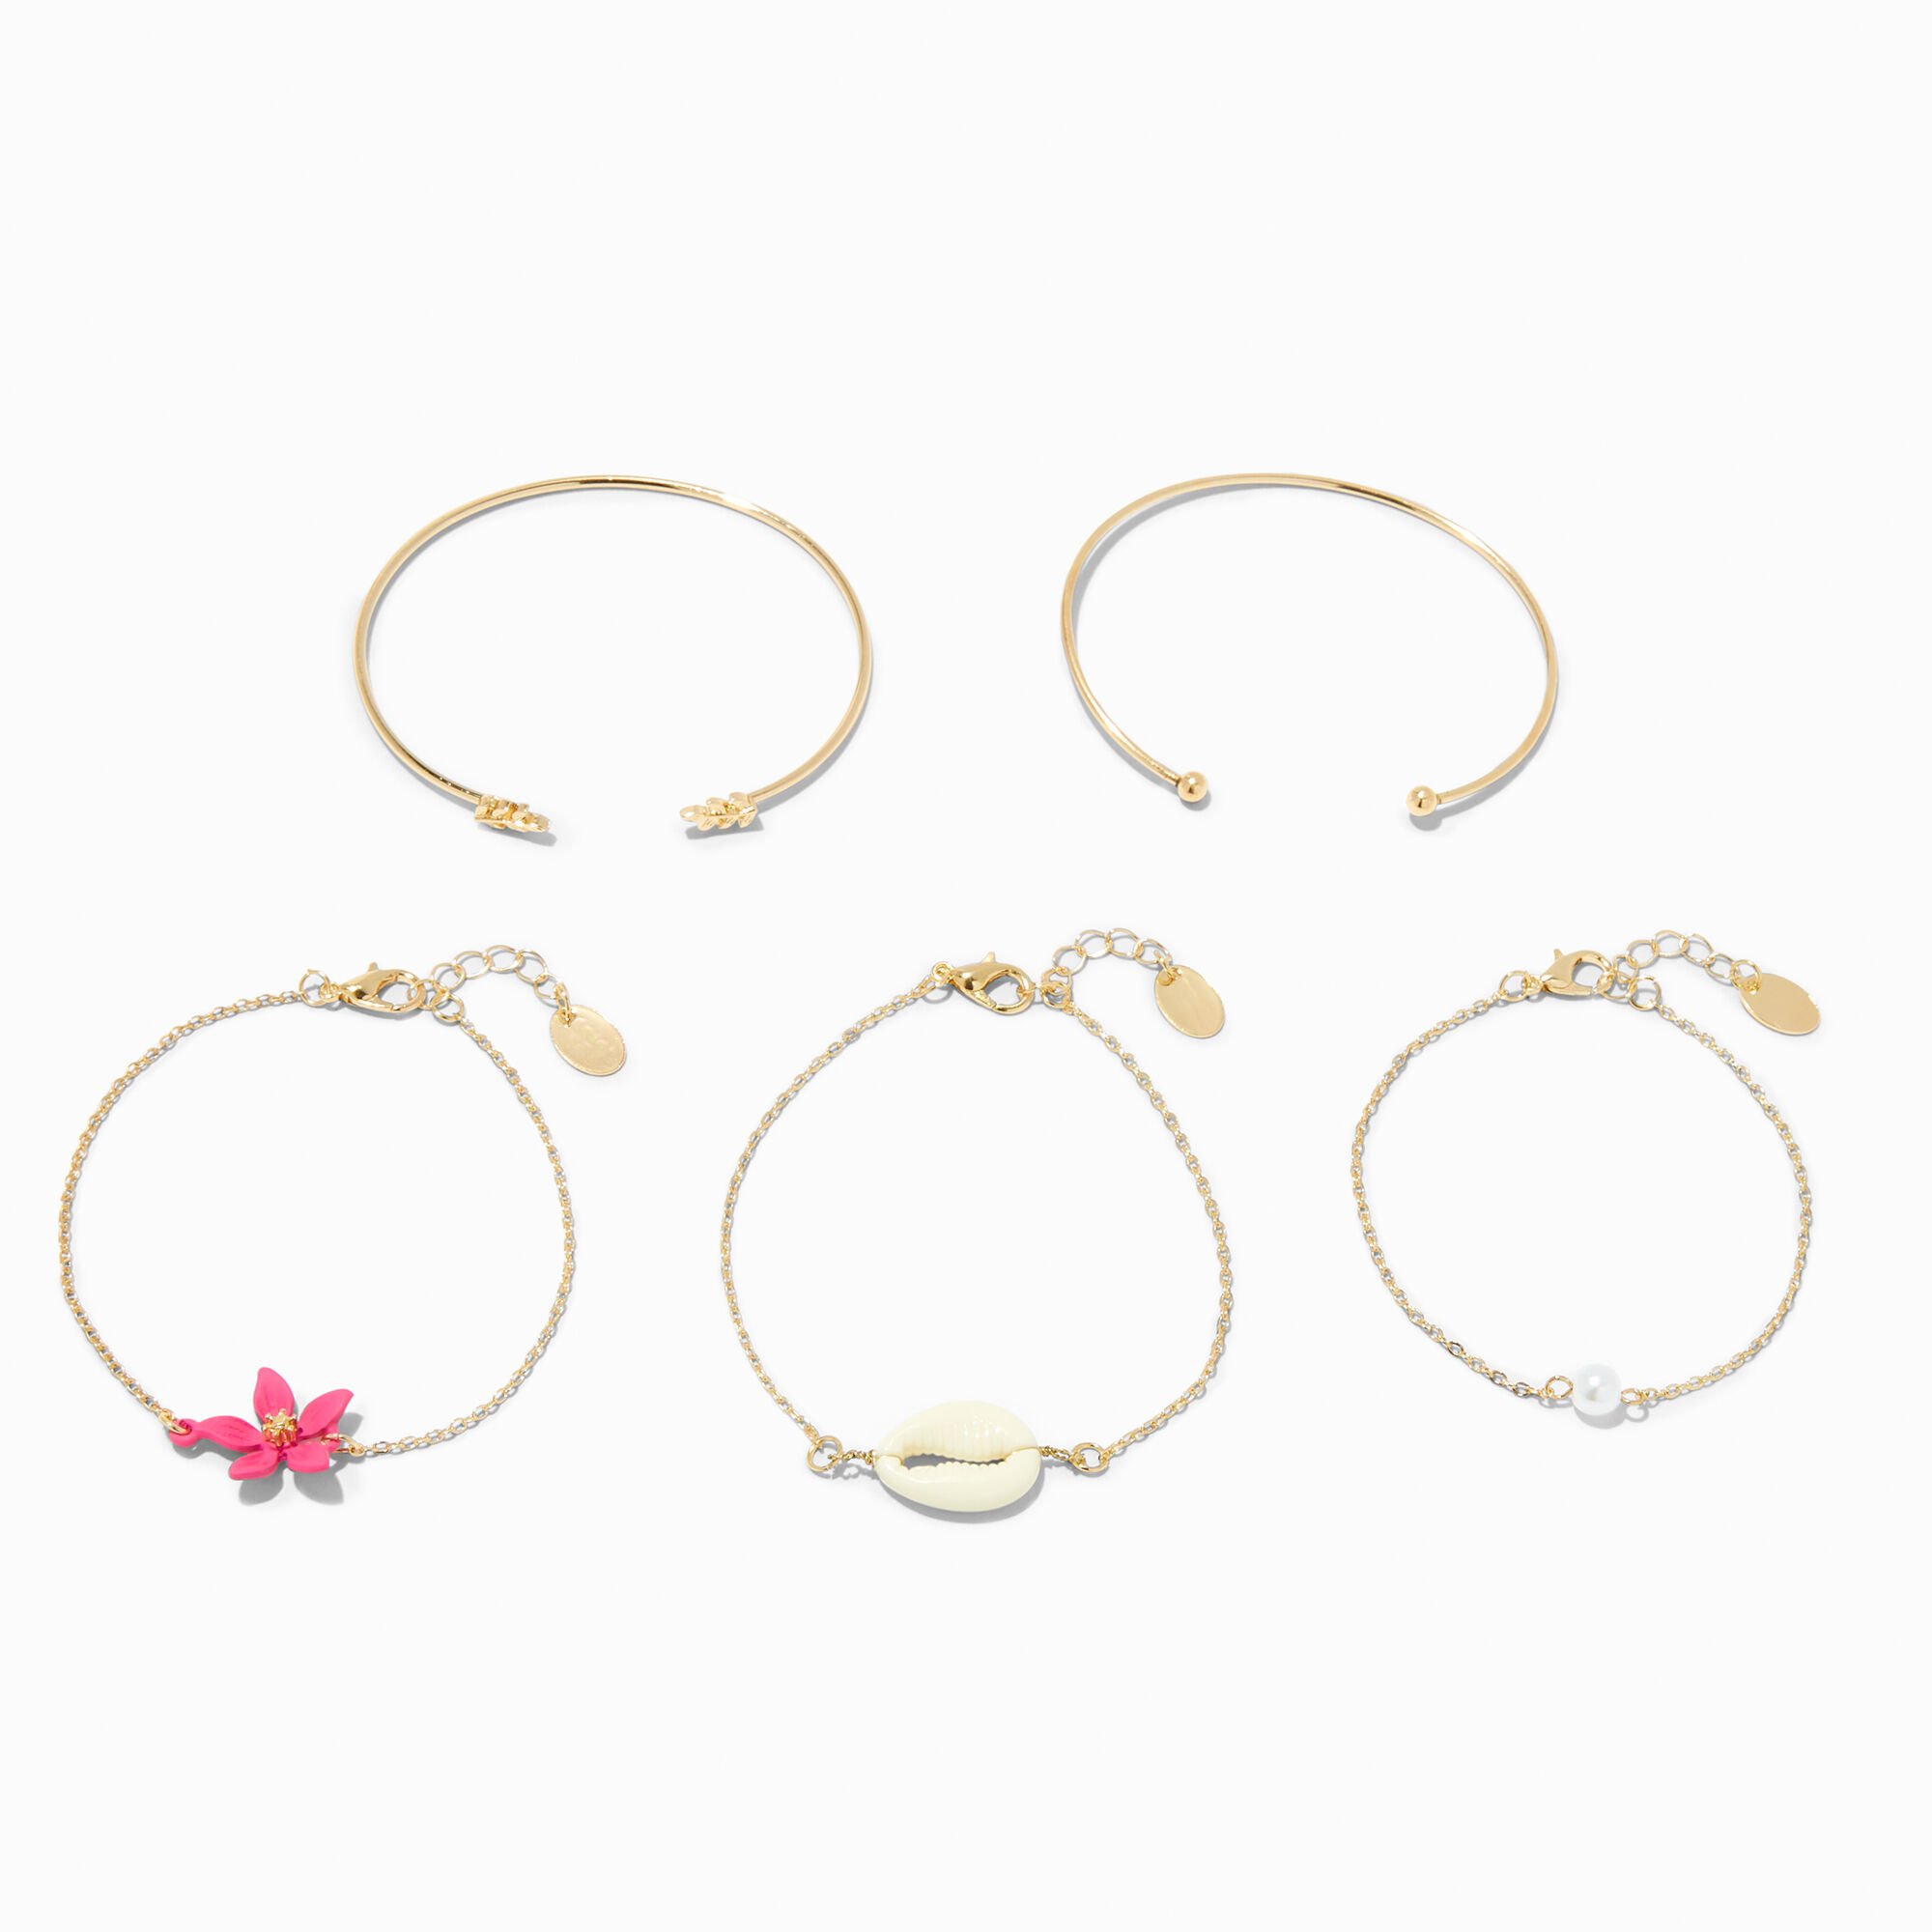 View Claires GoldTone Tropical Cuff Chain Bracelet Set 5 Pack Pink information